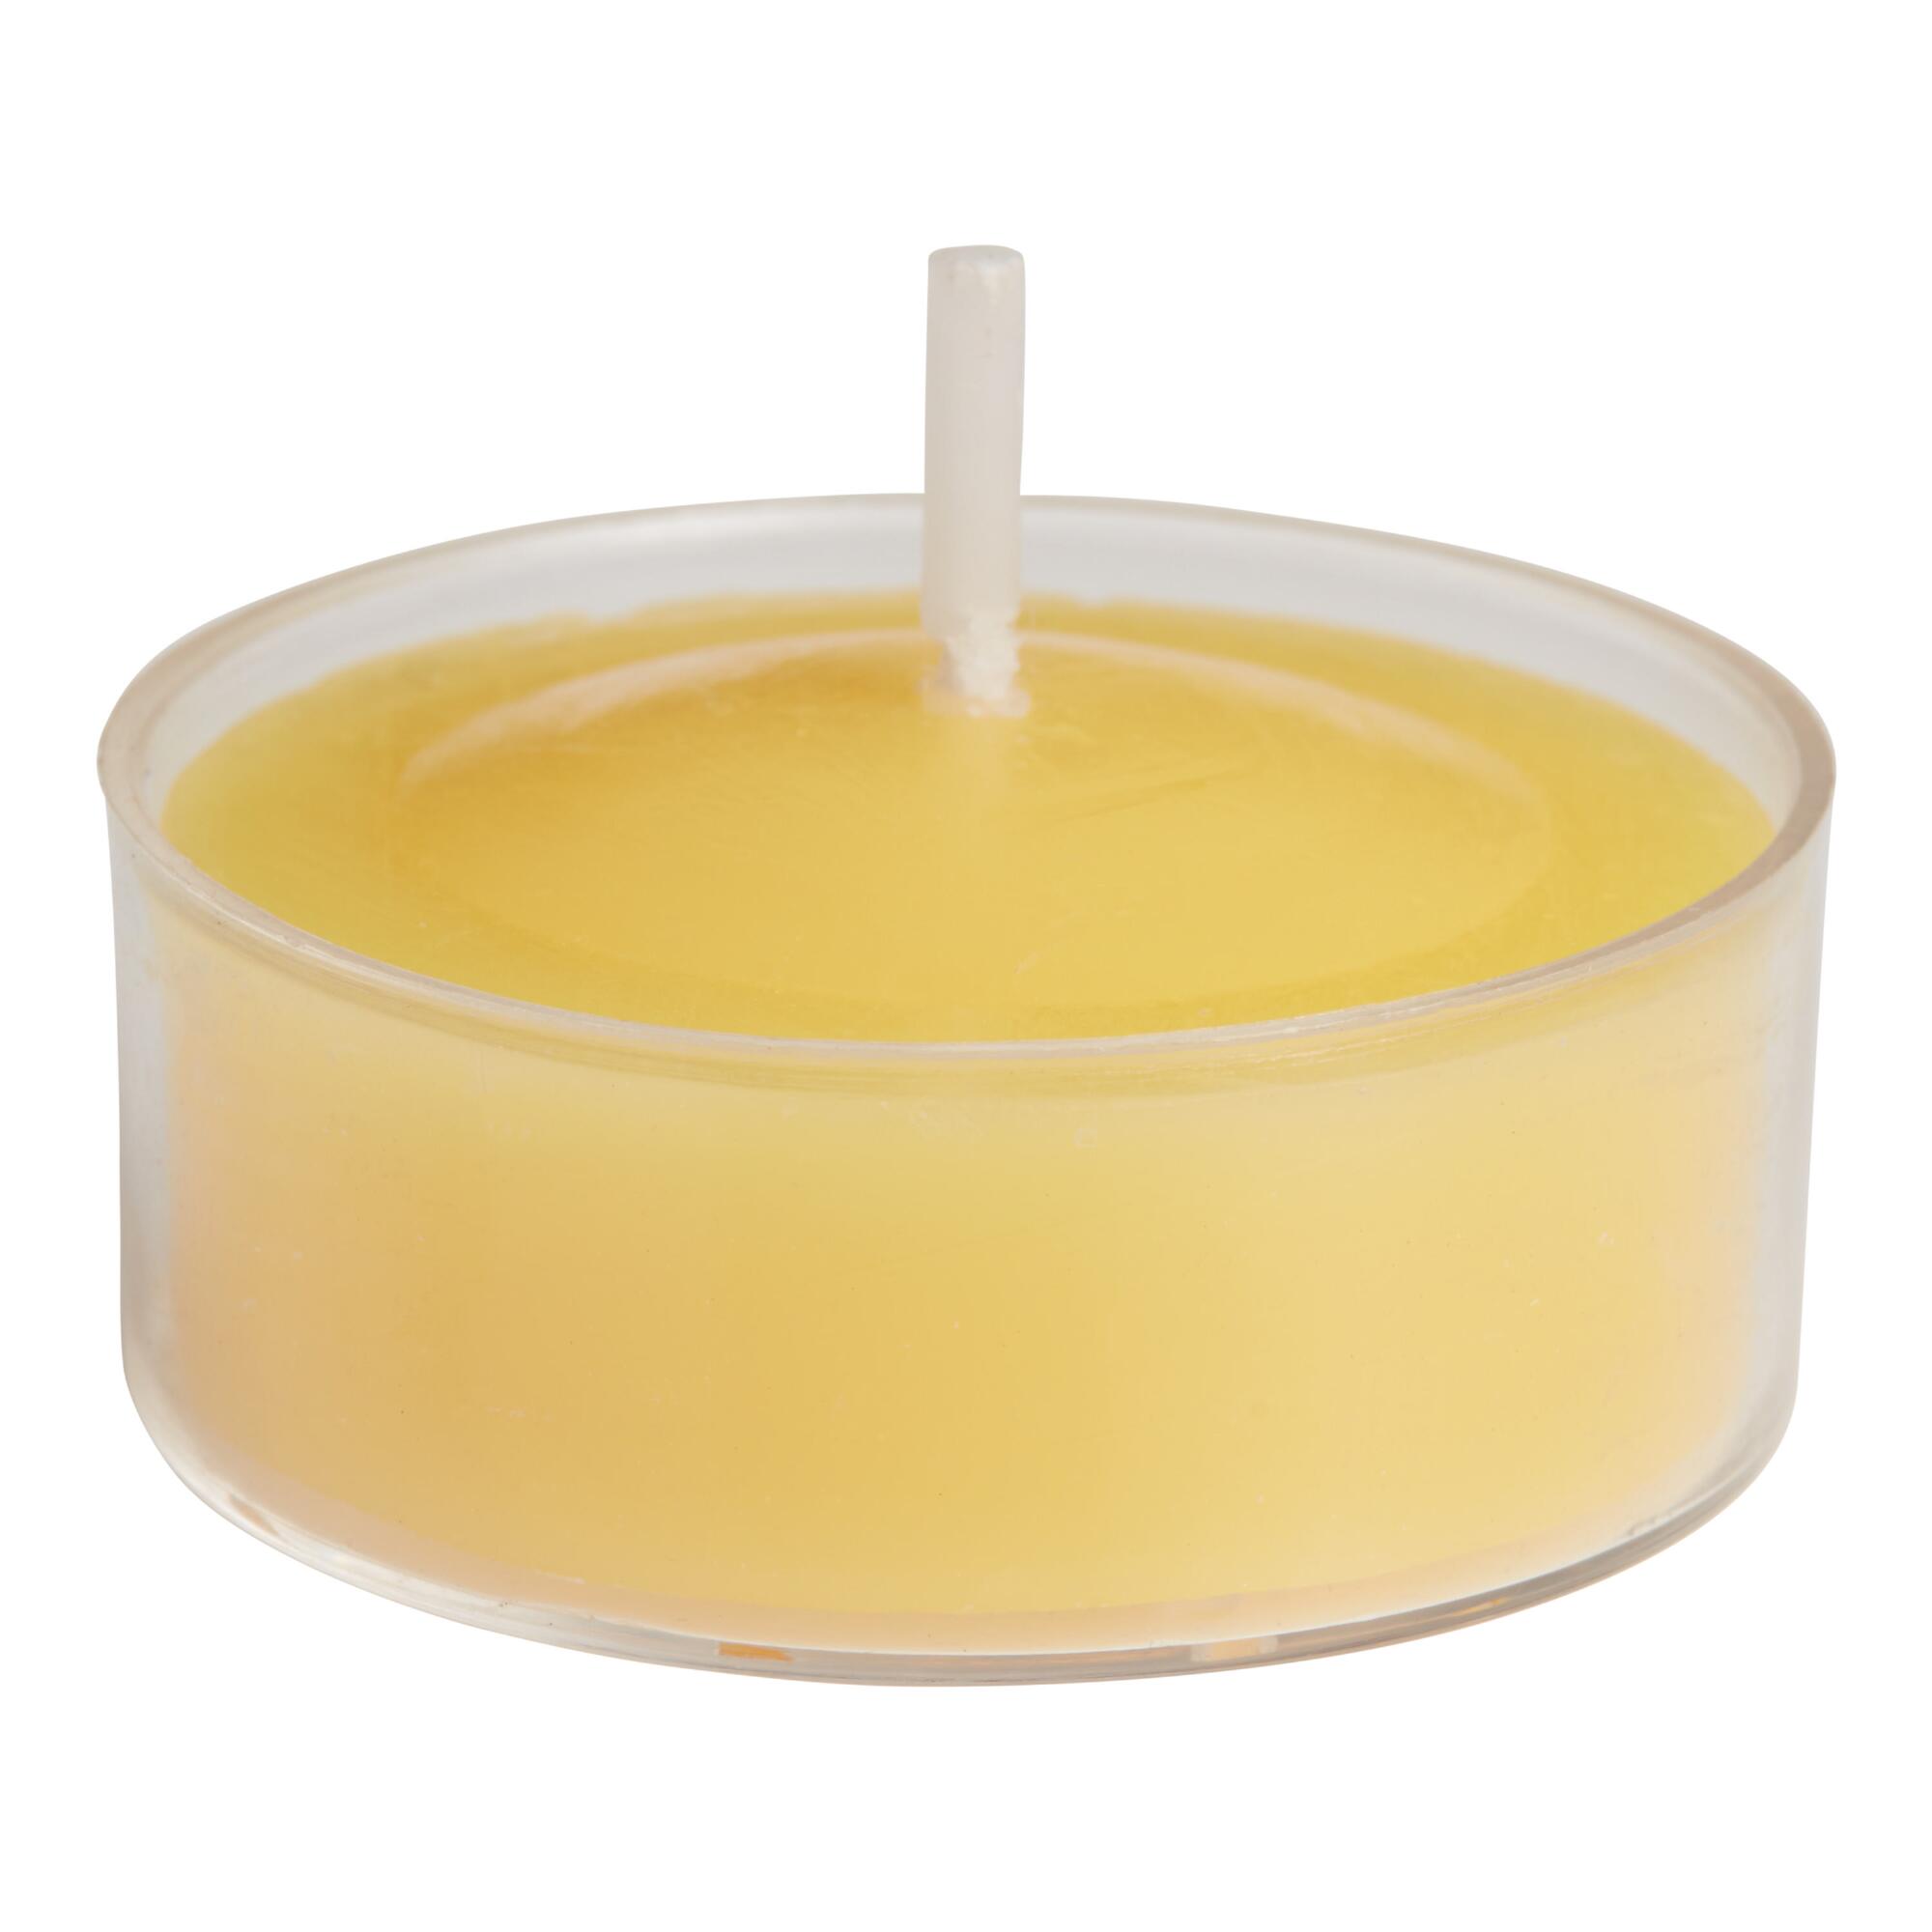 Limoncello Tealight Scented Candles 12 Pack: Yellow - Scented Wax by World Market